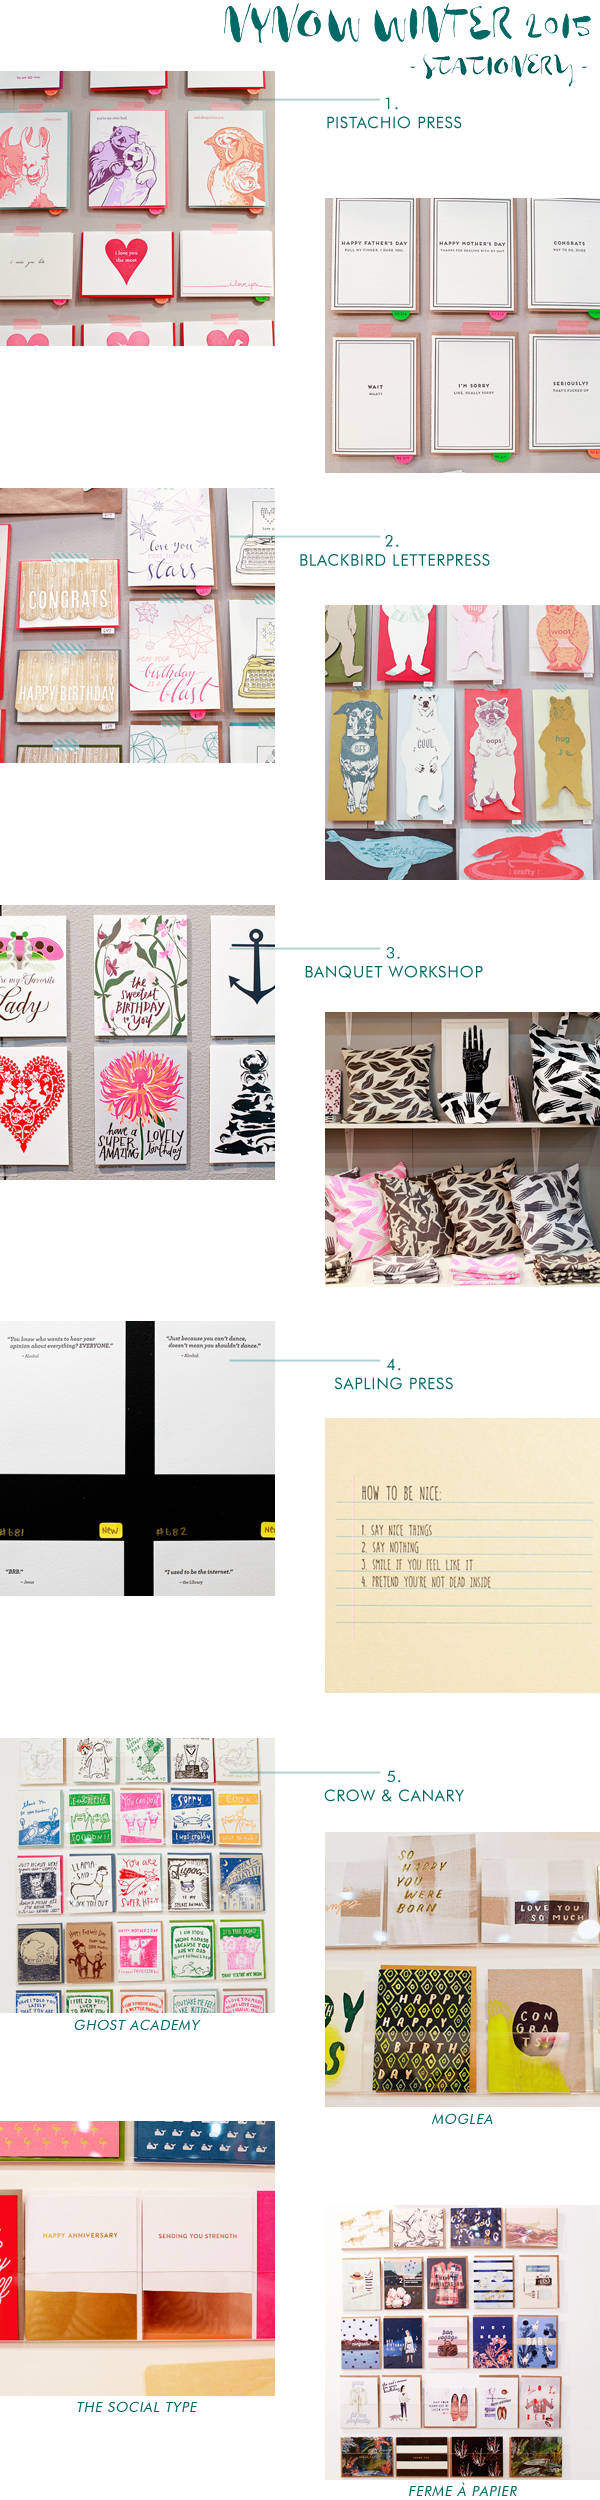 OSBP-NYNOW-Winter2015-Stationery2